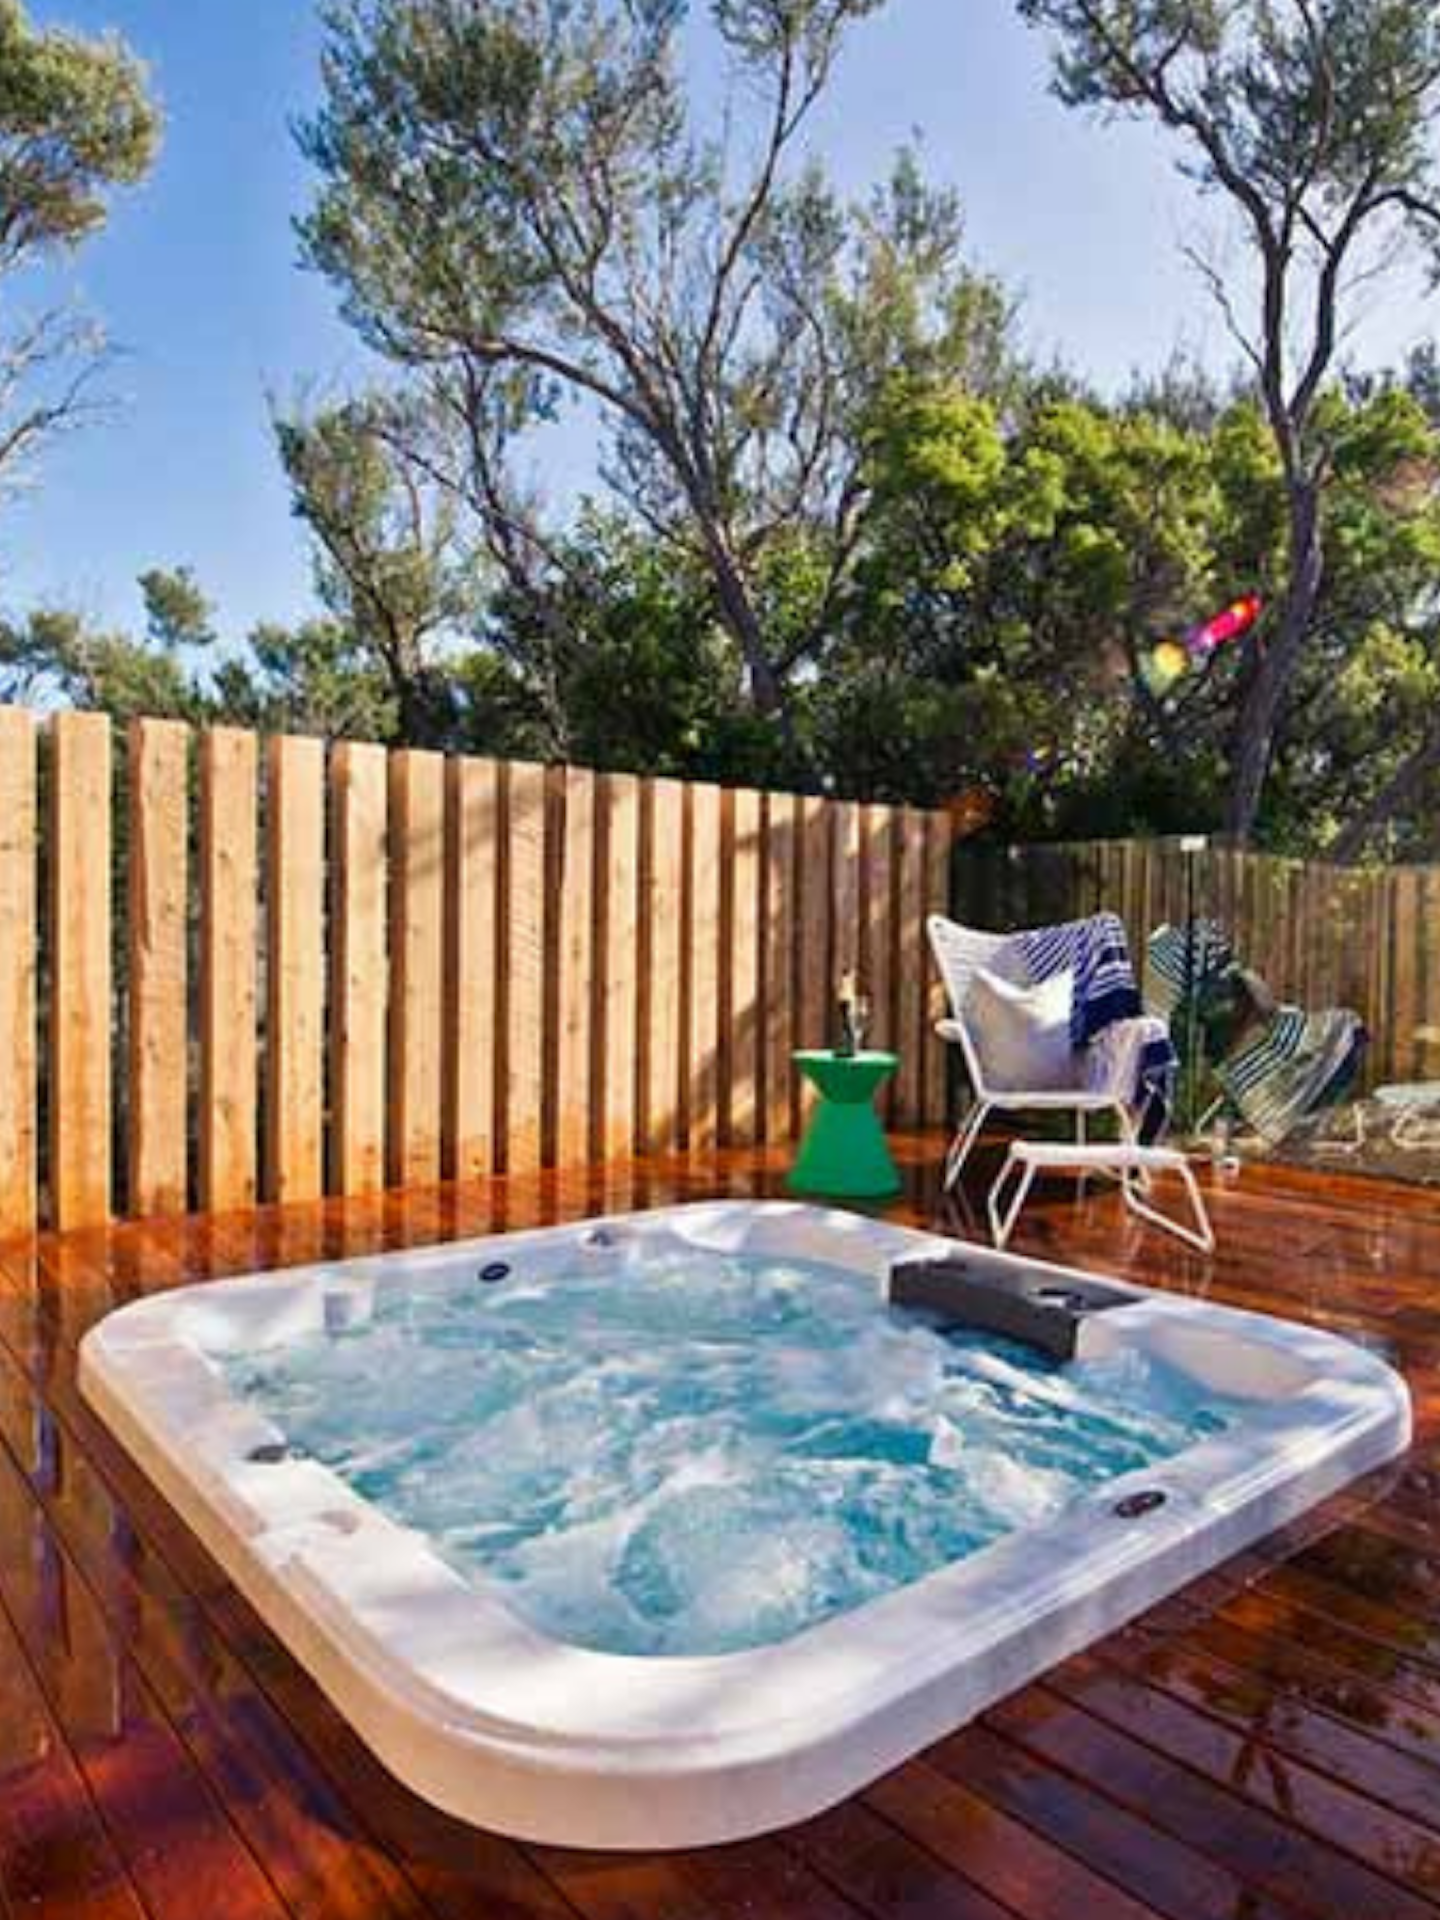 sunny timber deck with hot tub bubbling